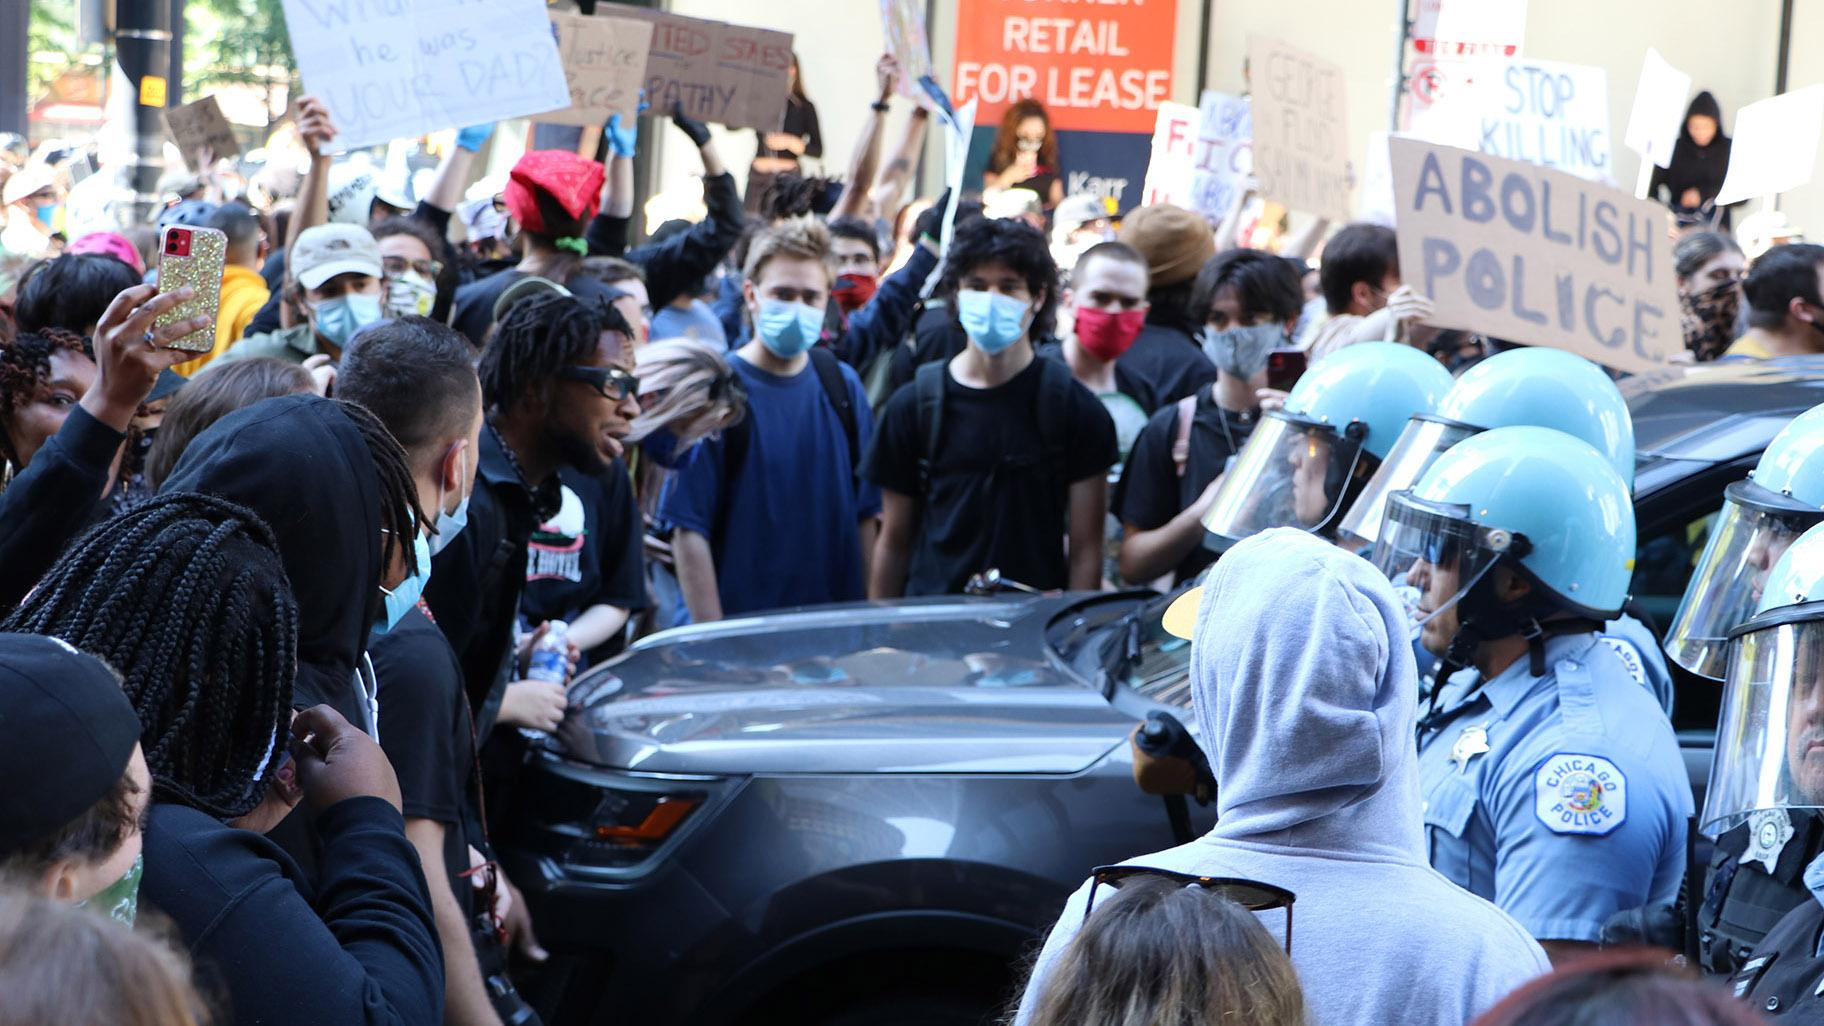 Protesters and police officers wearing riot gear have a standoff near Daley Plaza on Saturday, May 30, 2020. (Evan Garcia / WTTW News)